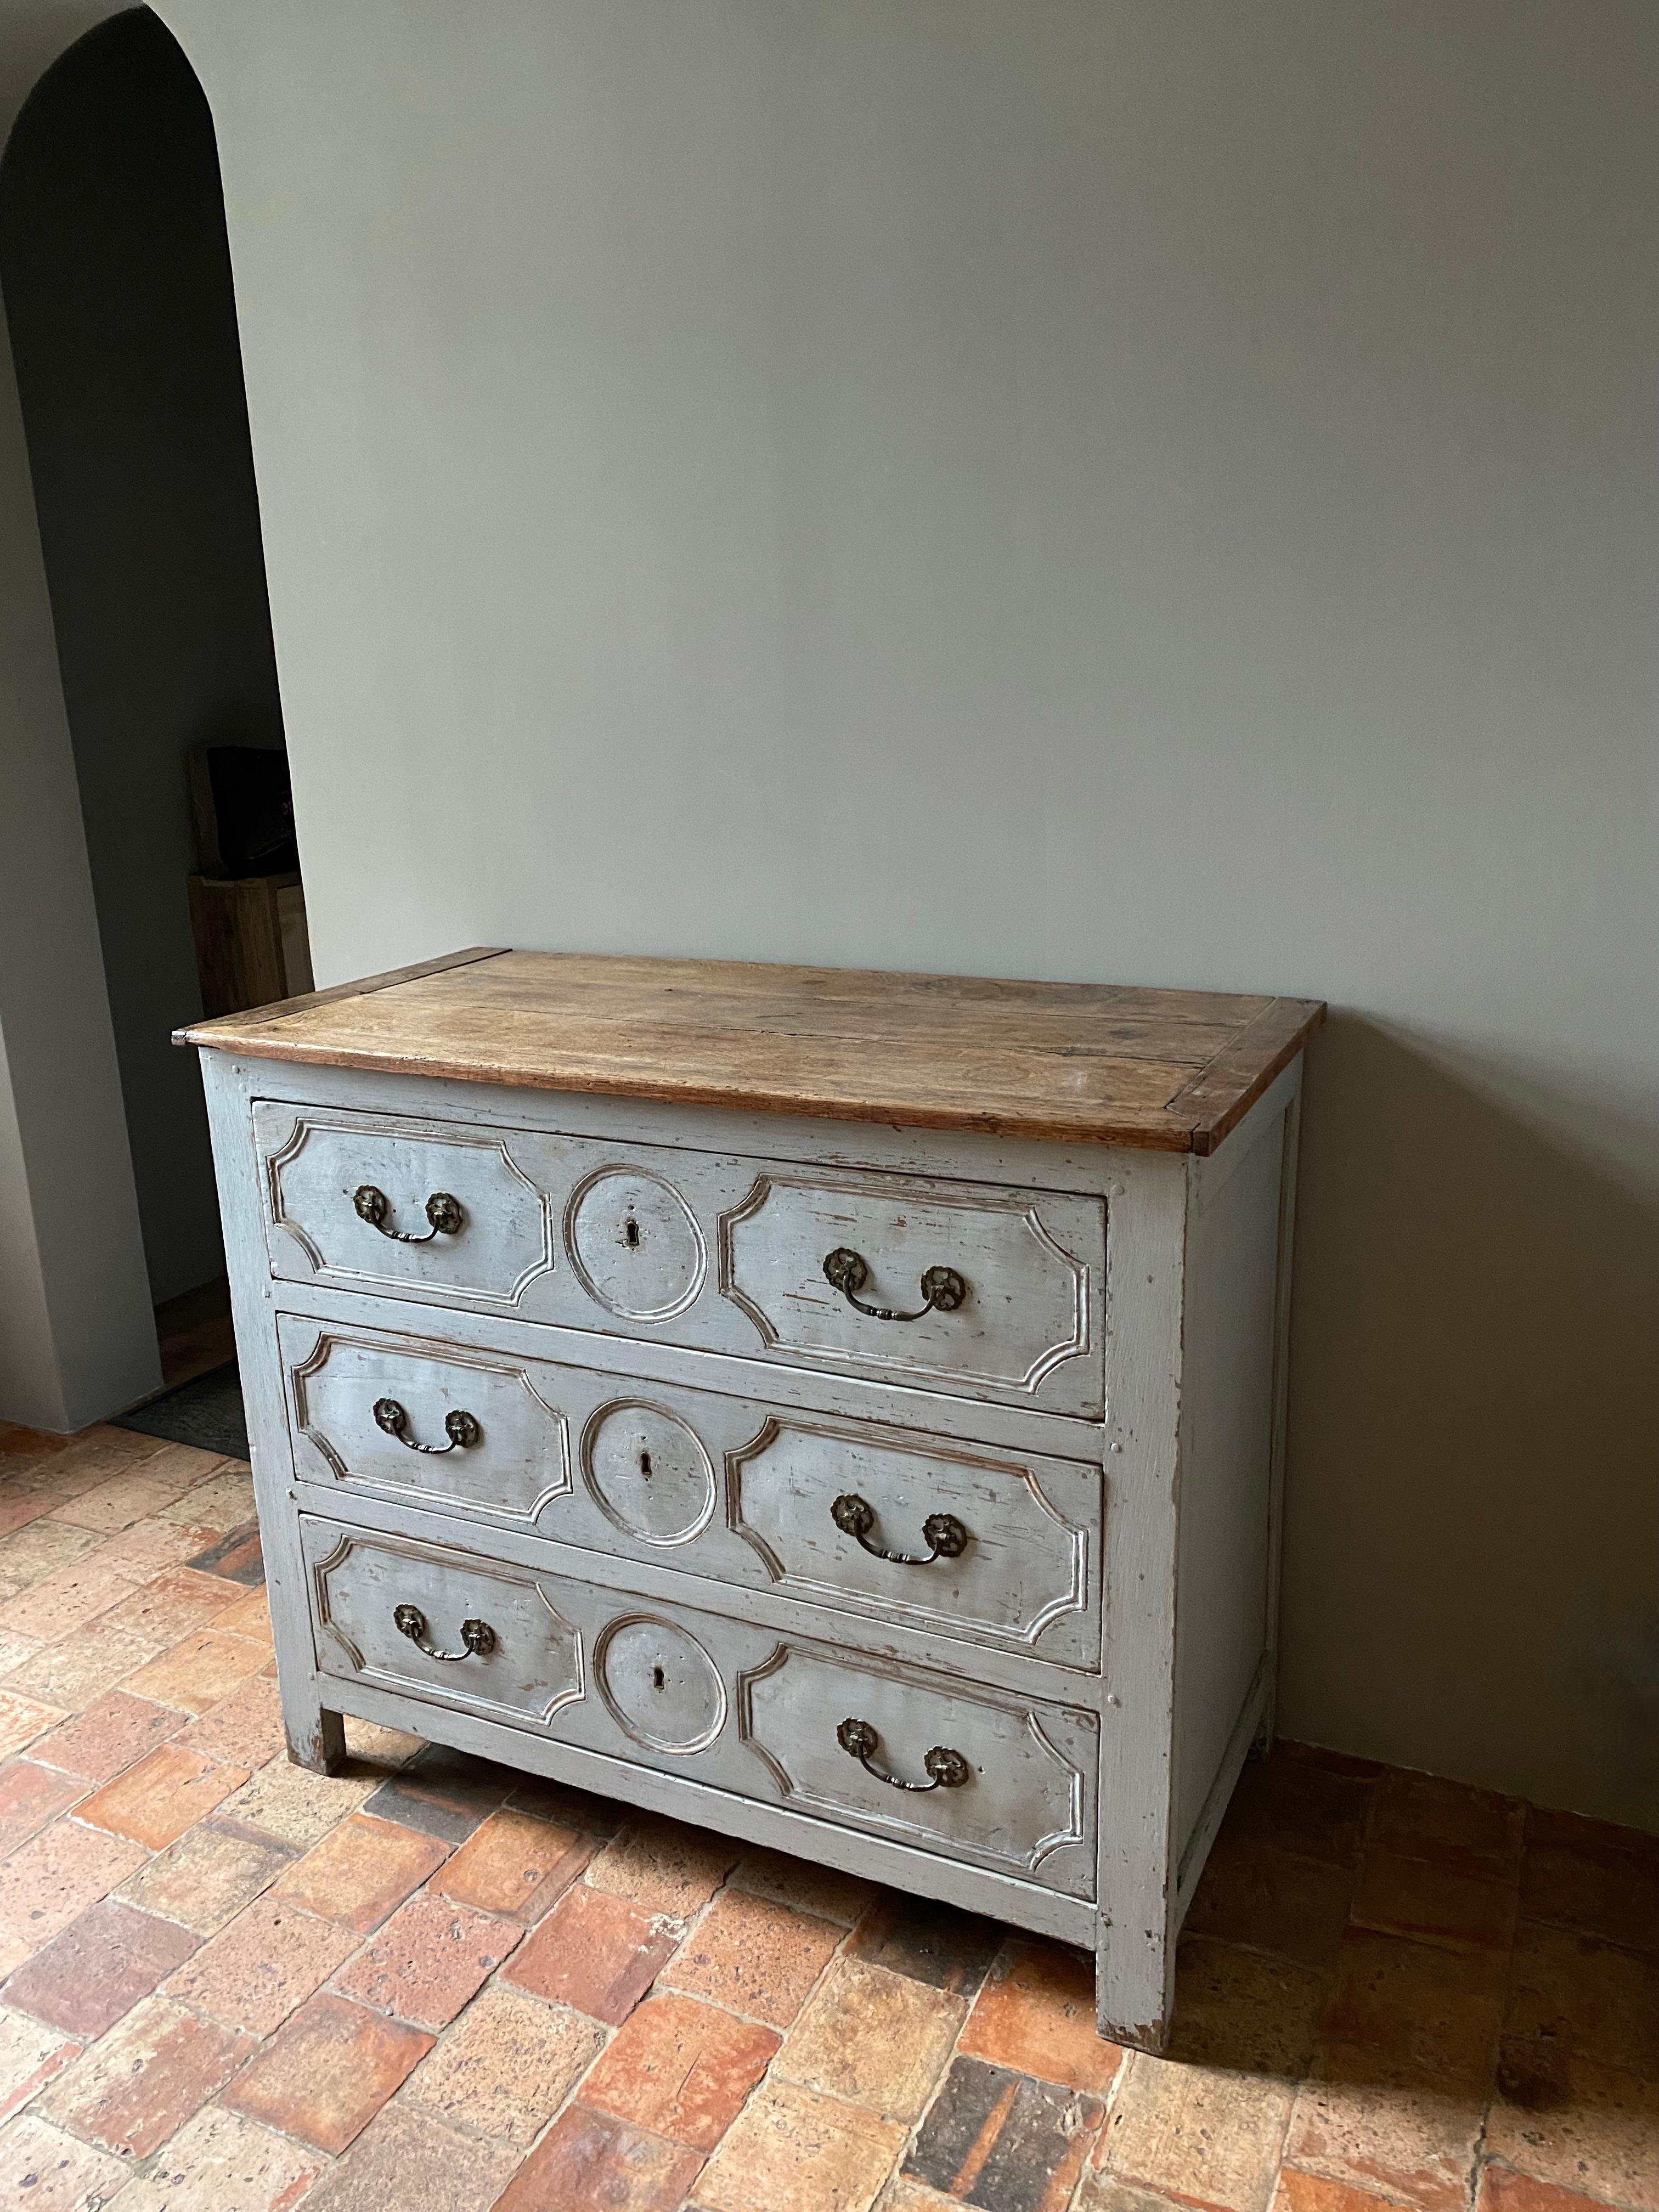 A 19th French Louis XIV Chest of drawers in a gray - blue patina with a tablet in natural oak.
Pure and simplistic design due to the straight legs.